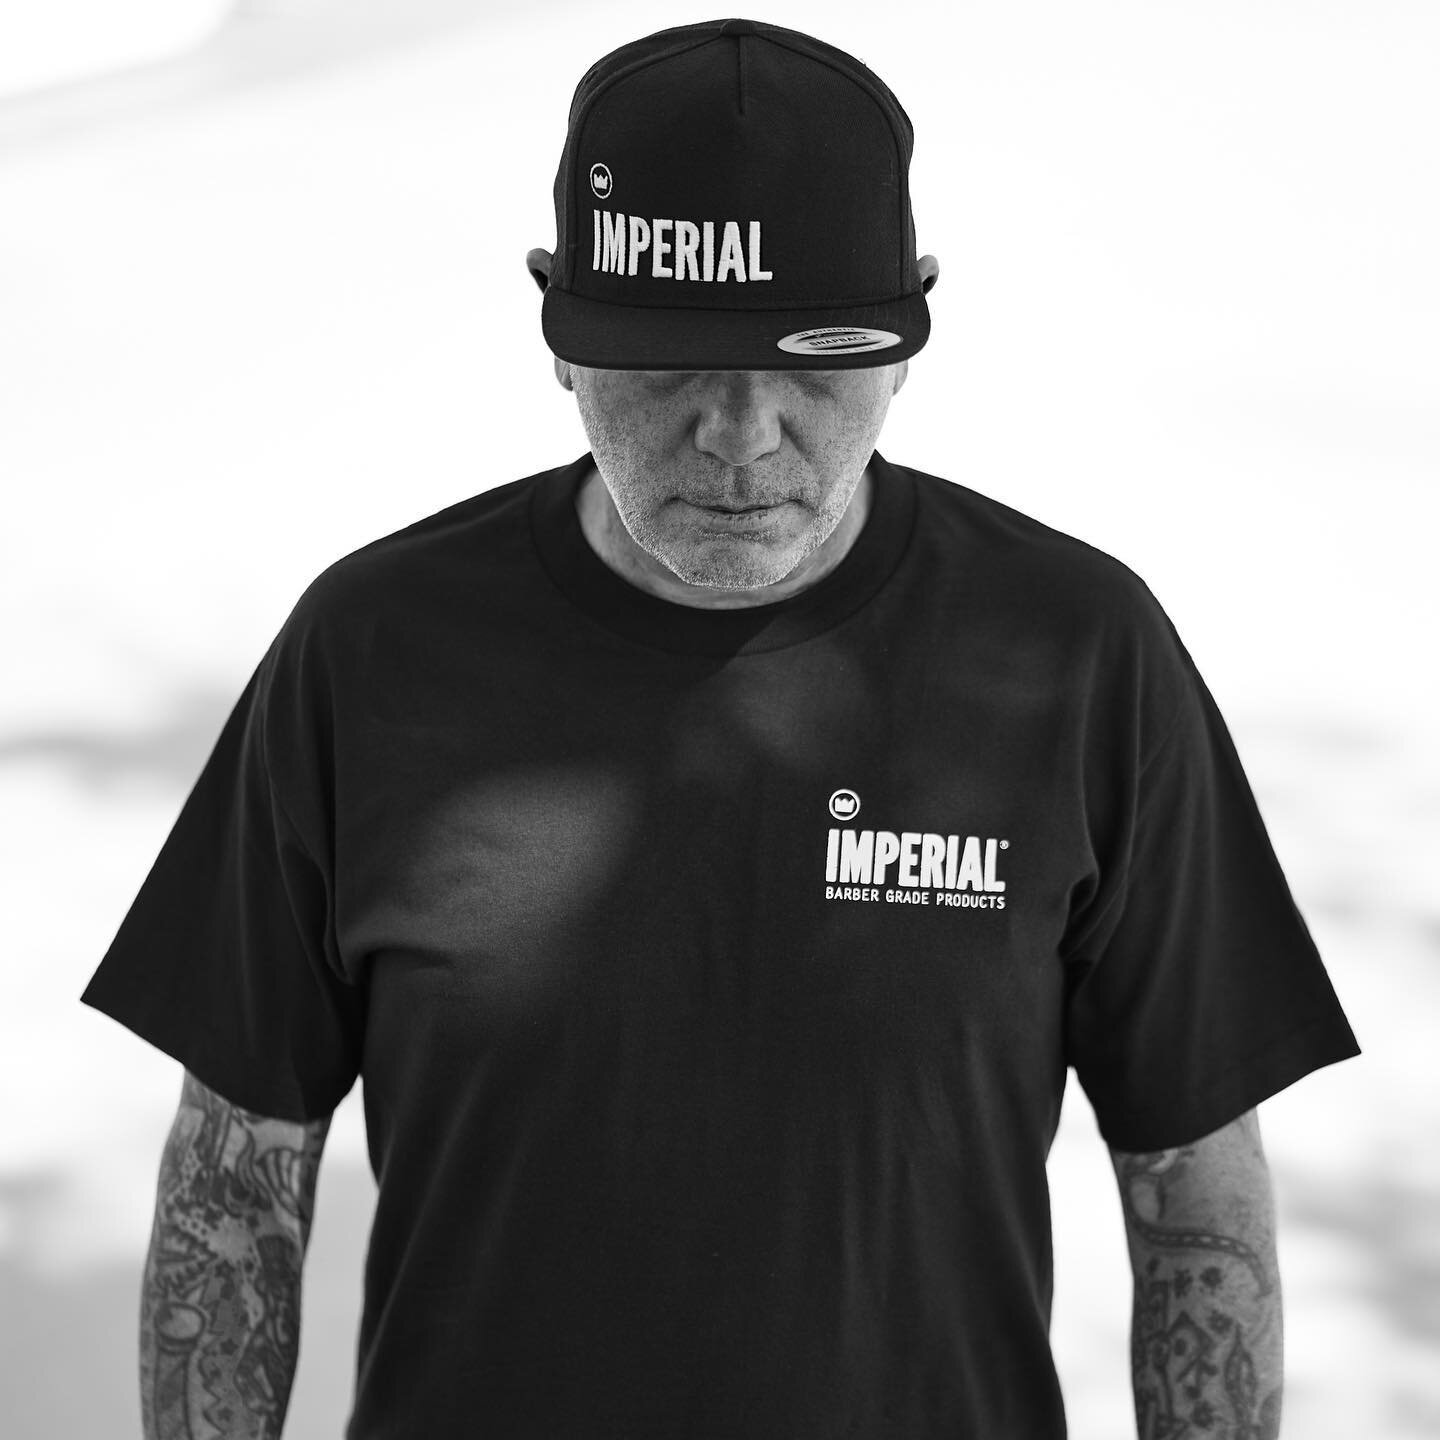 Brand new @imperialbarberproducts t-shirts and hats now available at the shop. Get em while supplies last! 💈#imperialbarberproducts #razorbacksbarbershop